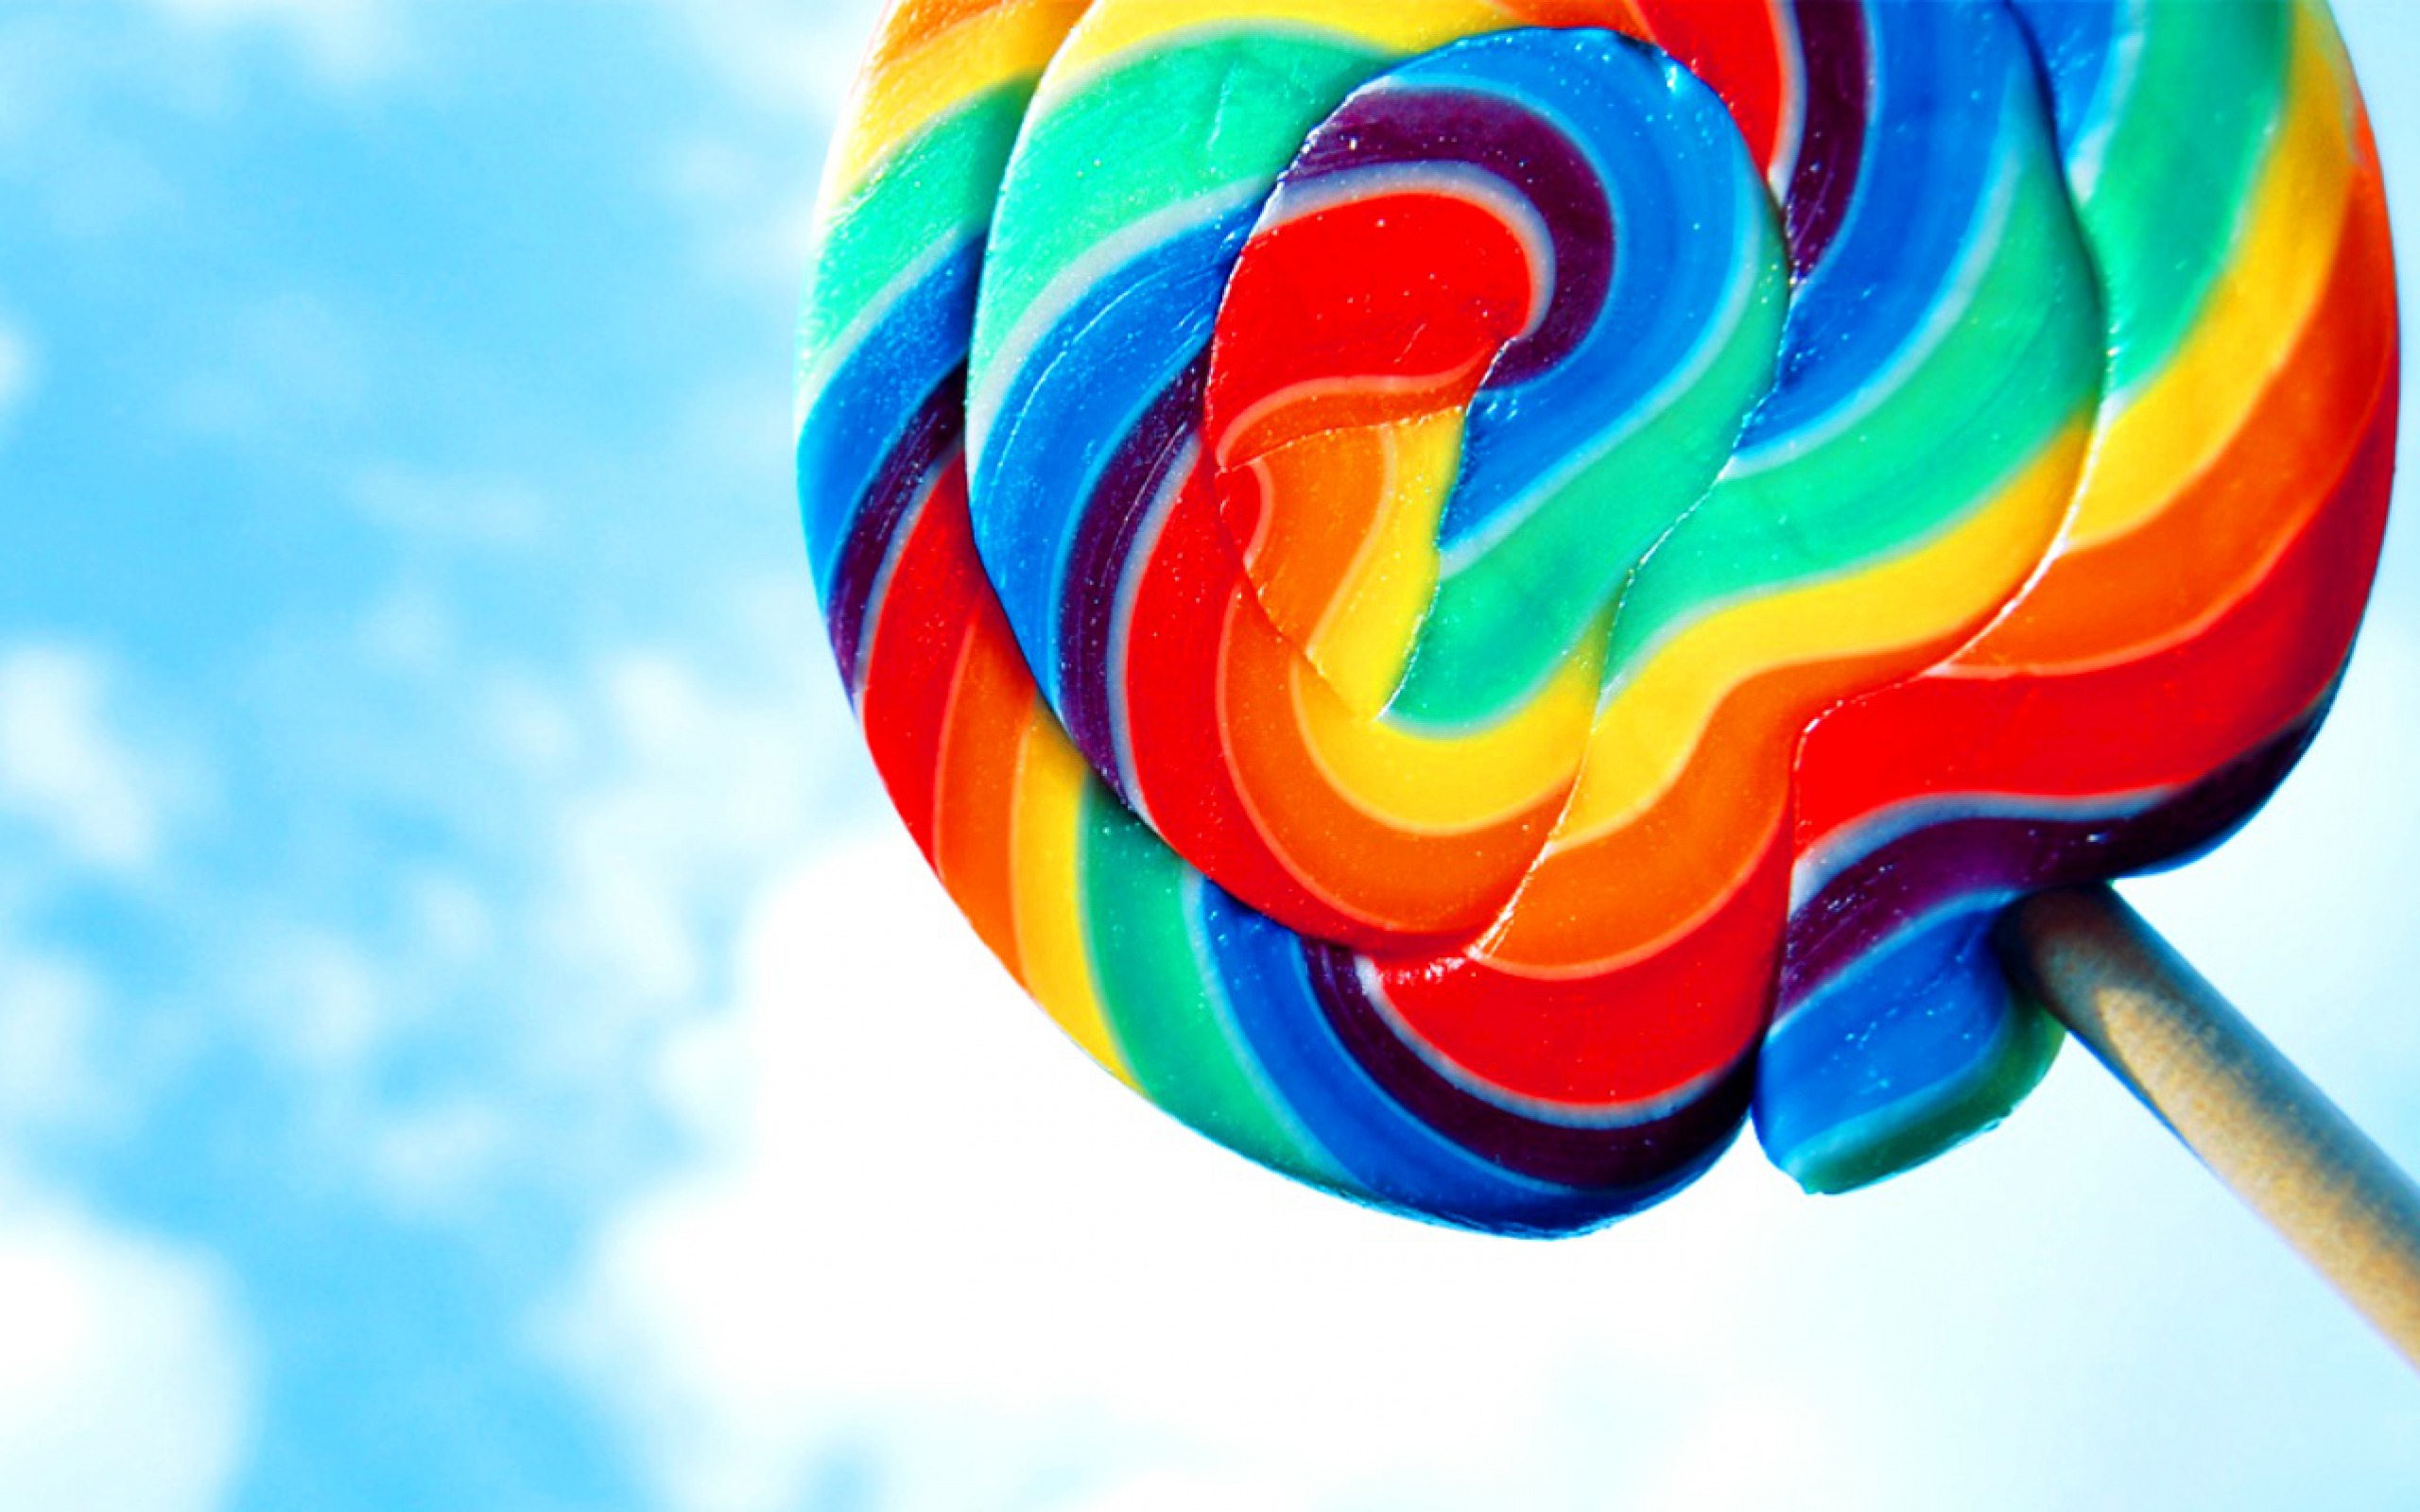 Weekly Wallpaper: Celebrate Android L With These Lollipop Wallpapers